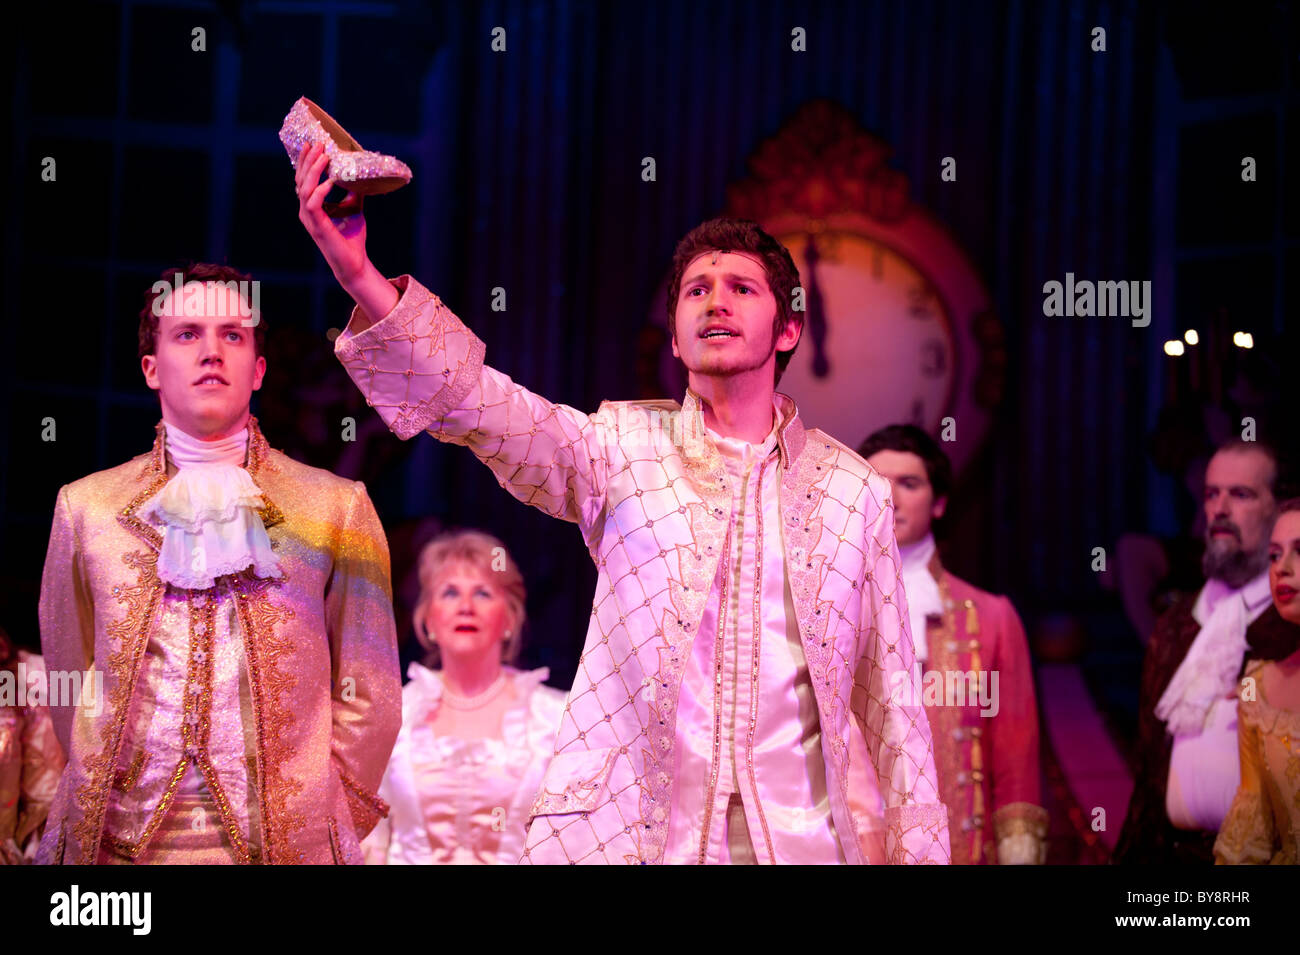 Prince Charming holding the glass slipper in 'Cinderella' the traditional pantomime, Aberystwyth Arts Centre, UK Stock Photo